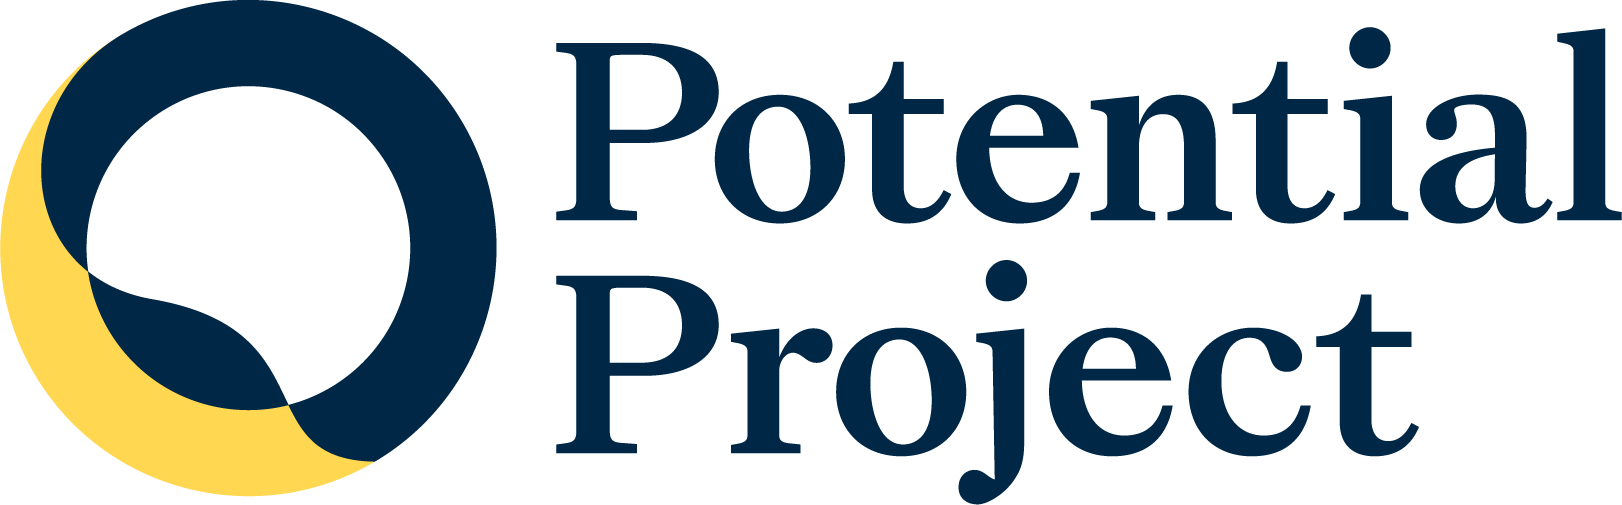 Potential-Project